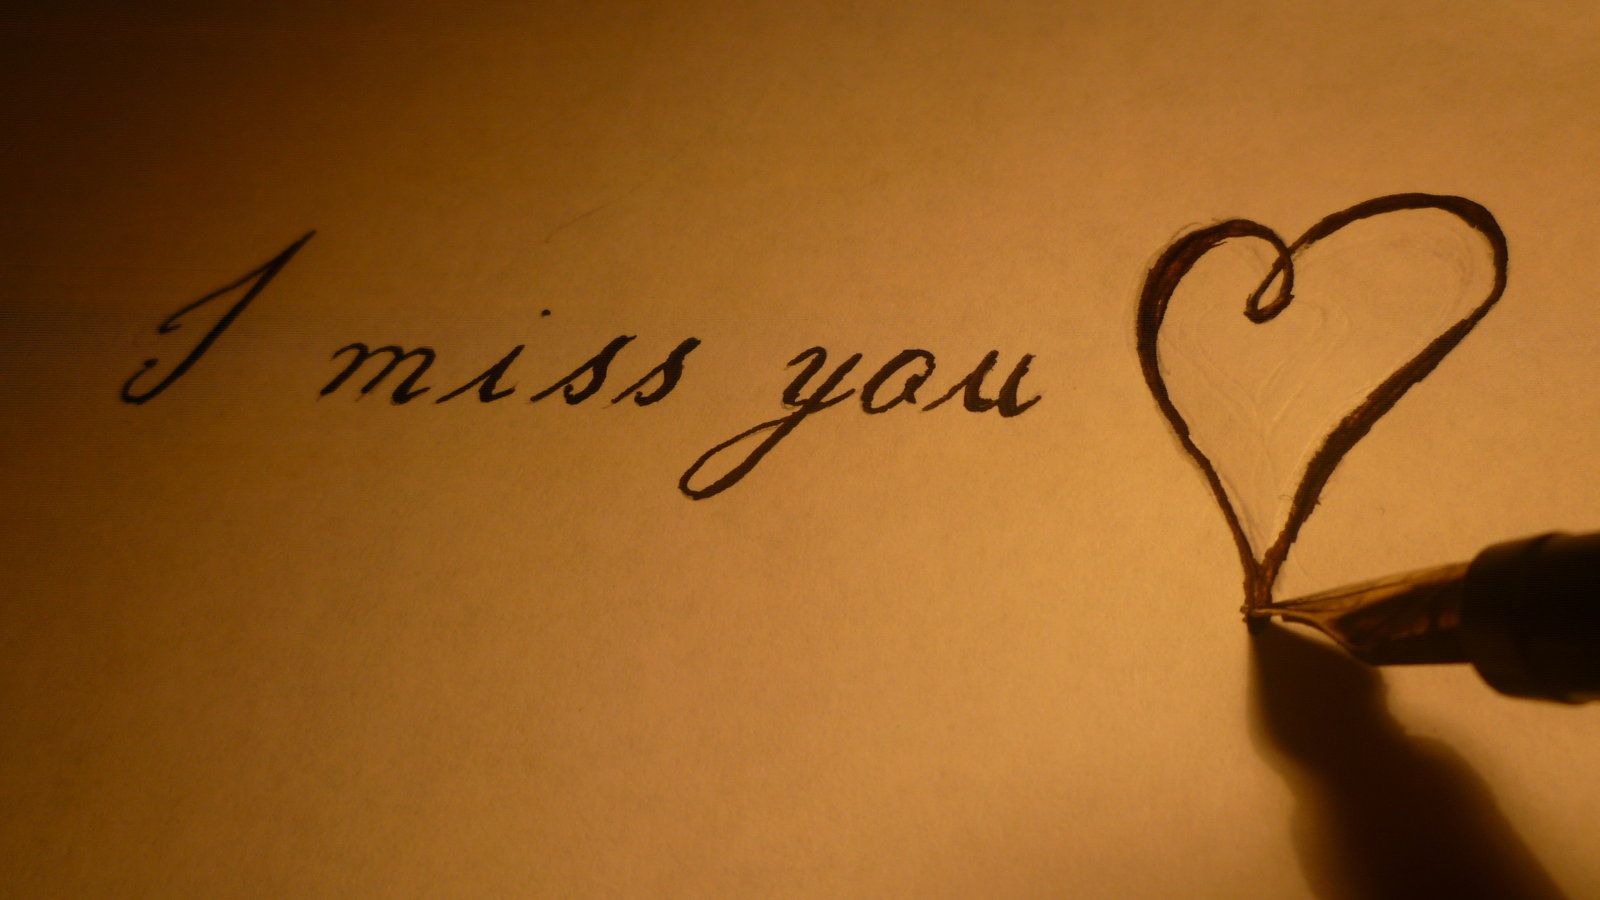 HEARTTOUCHING MISS YOU IMAGES. Style. I miss you meme, Miss you image, Missing you memes